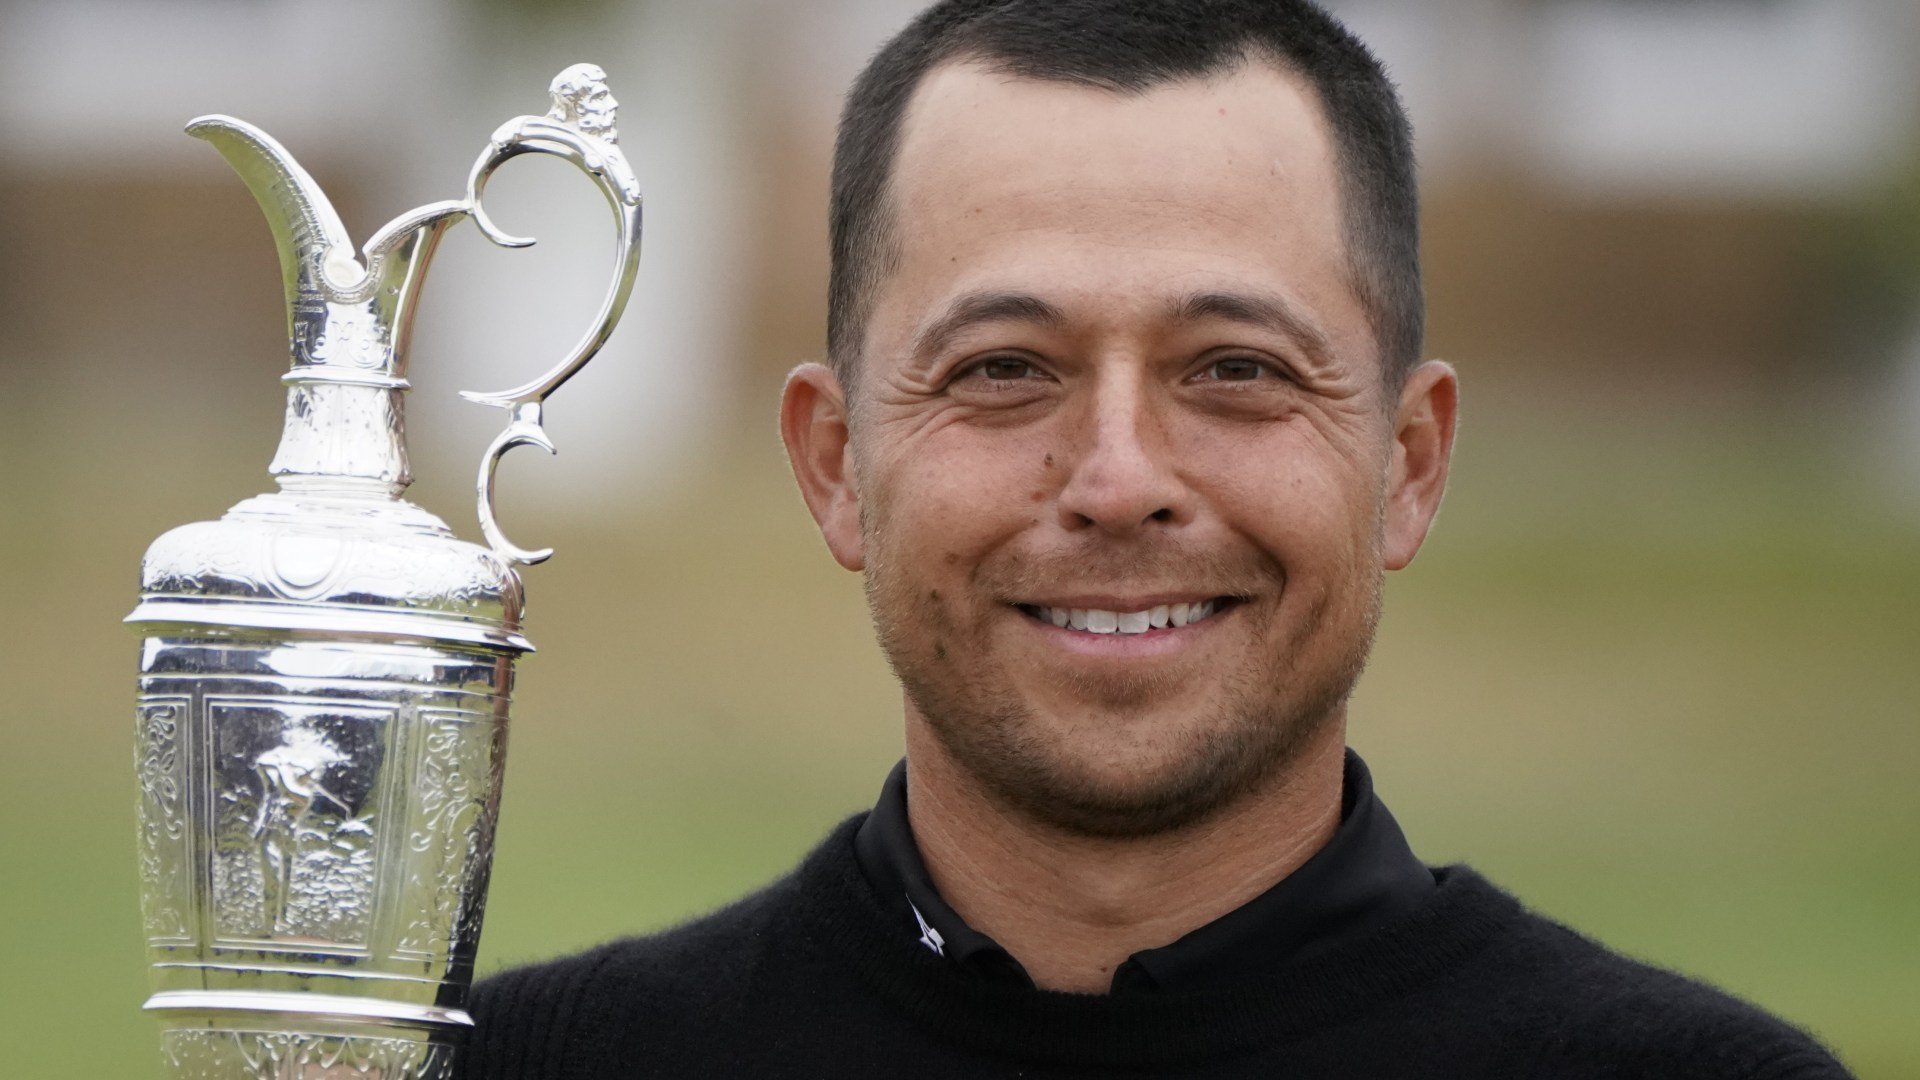 The Open winner Xander Schauffele nearly became professional footballer but quit and took up golf after row with coach